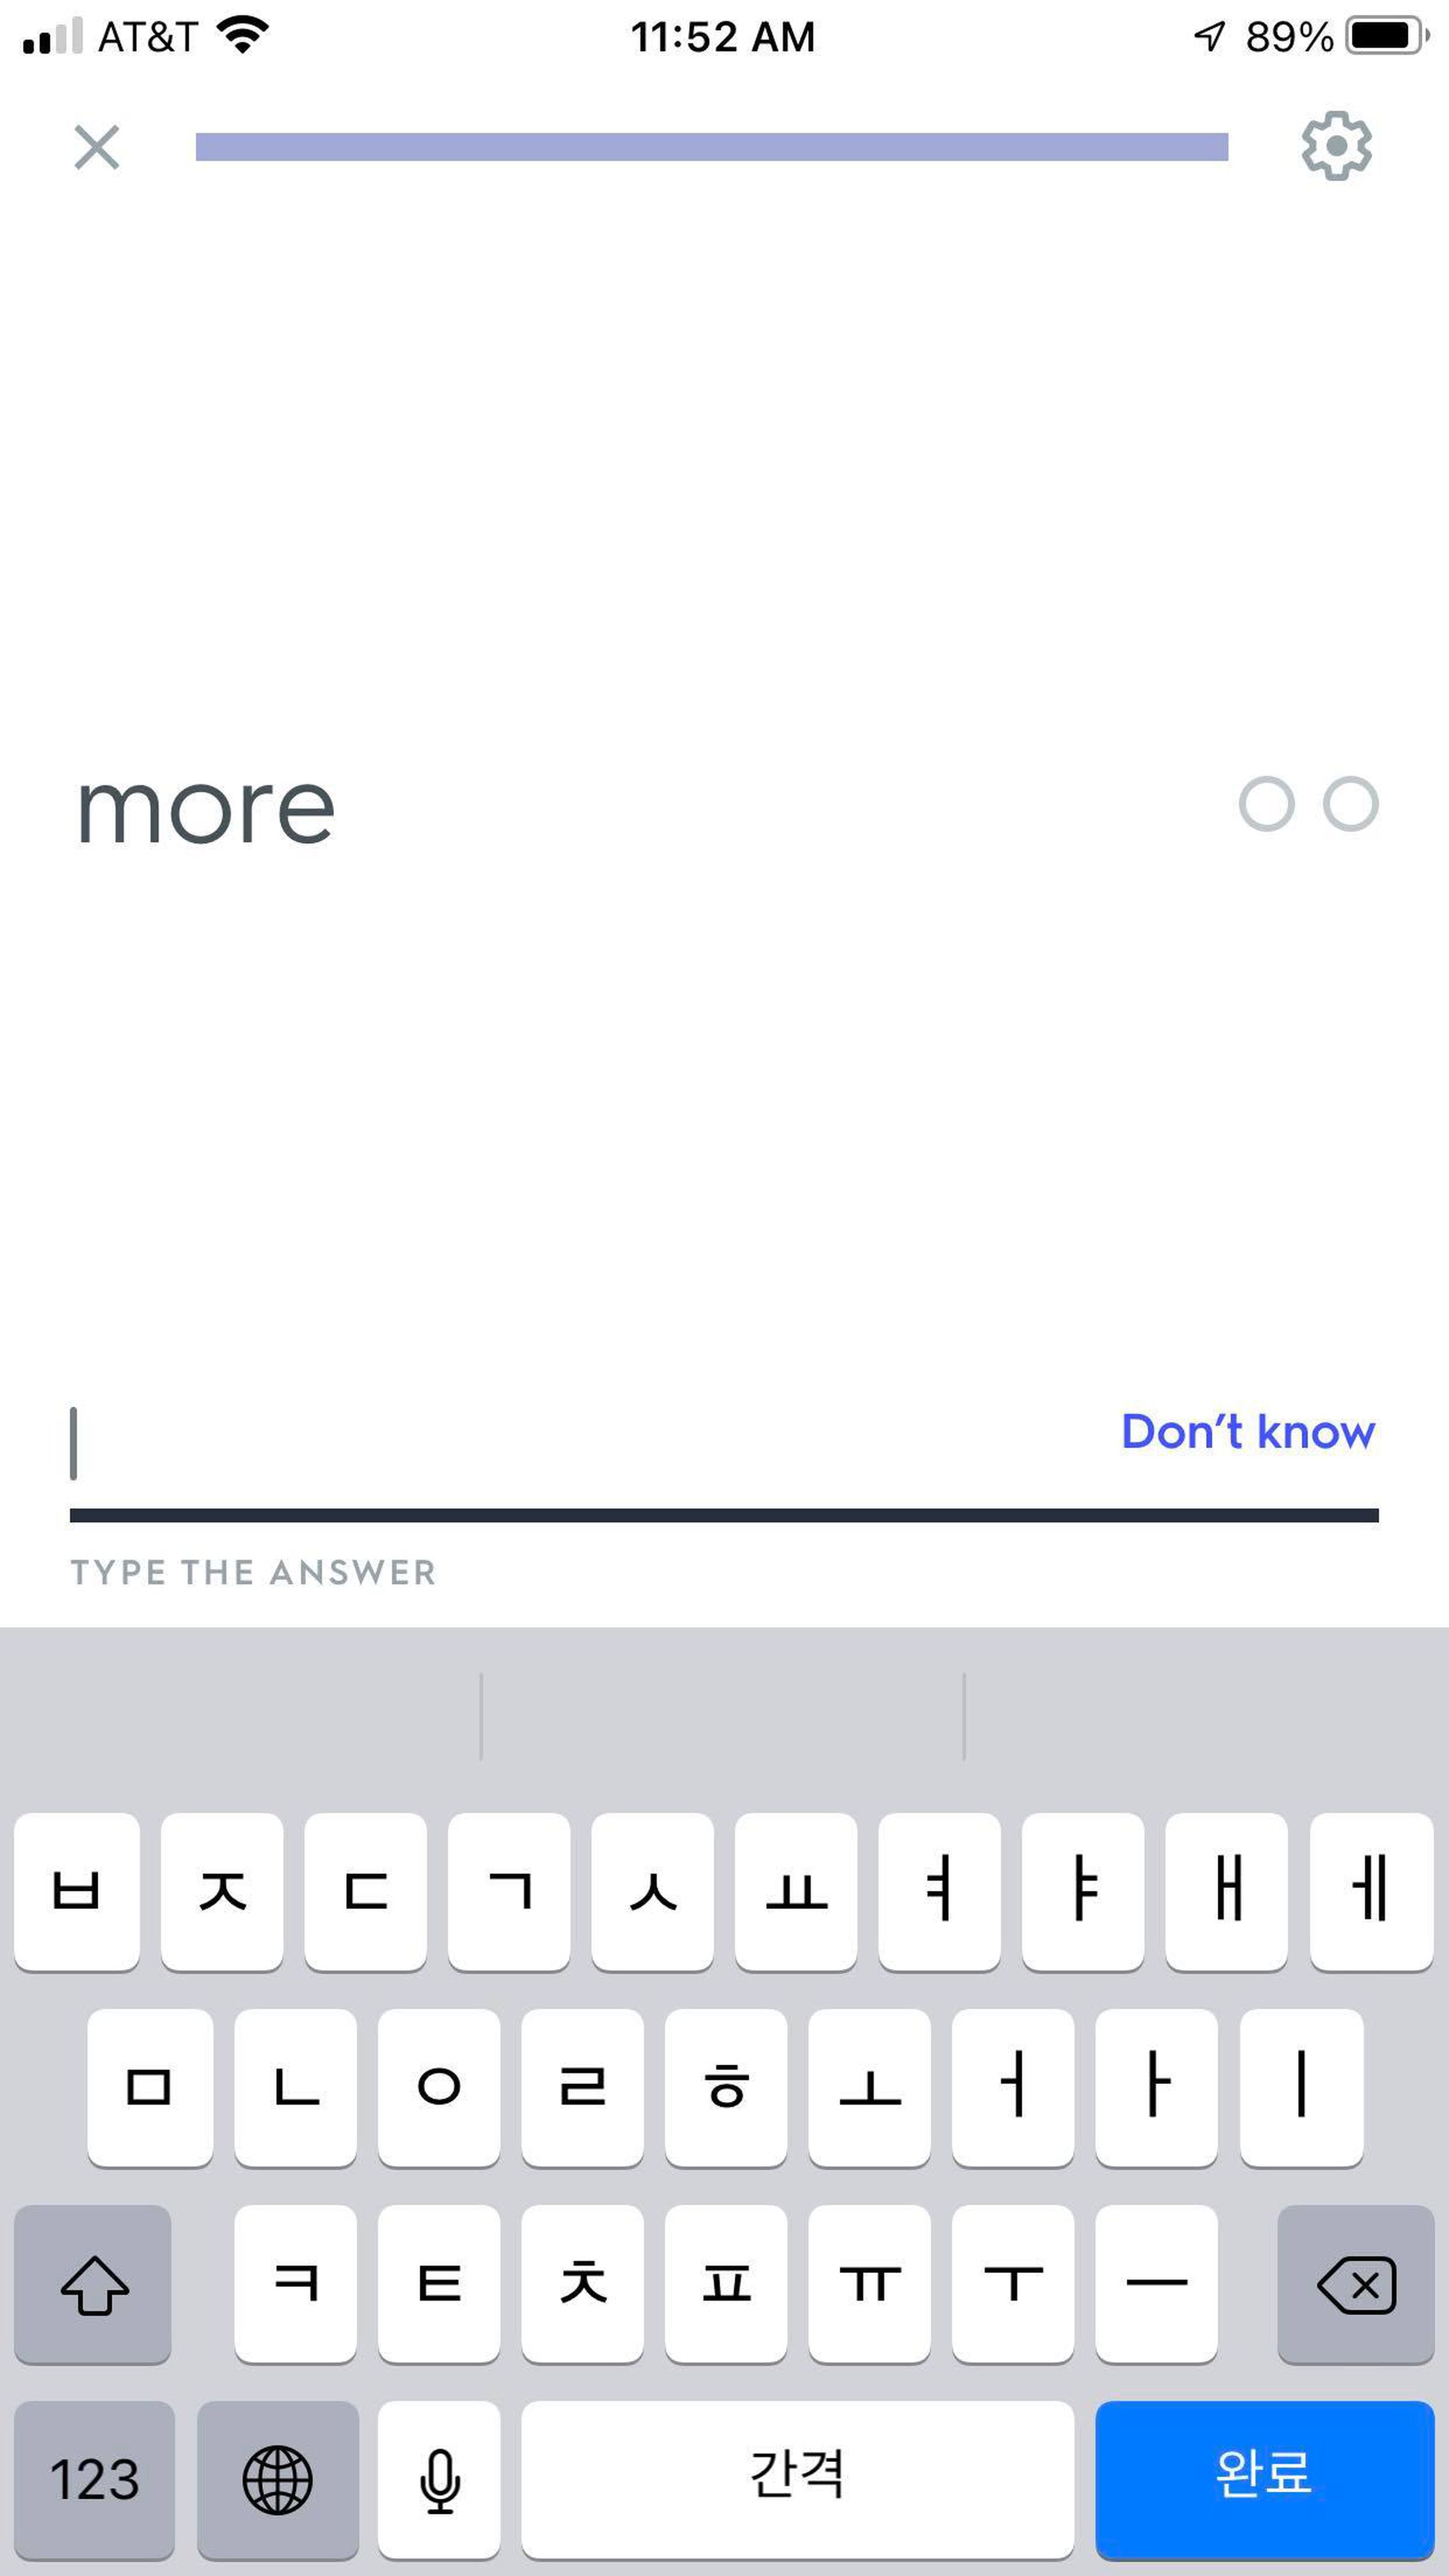 A screenshot of the Quizlet app displaying the word “More”. Below is a text box with the instructions “Type the Answer” and a “Don’t know” button.